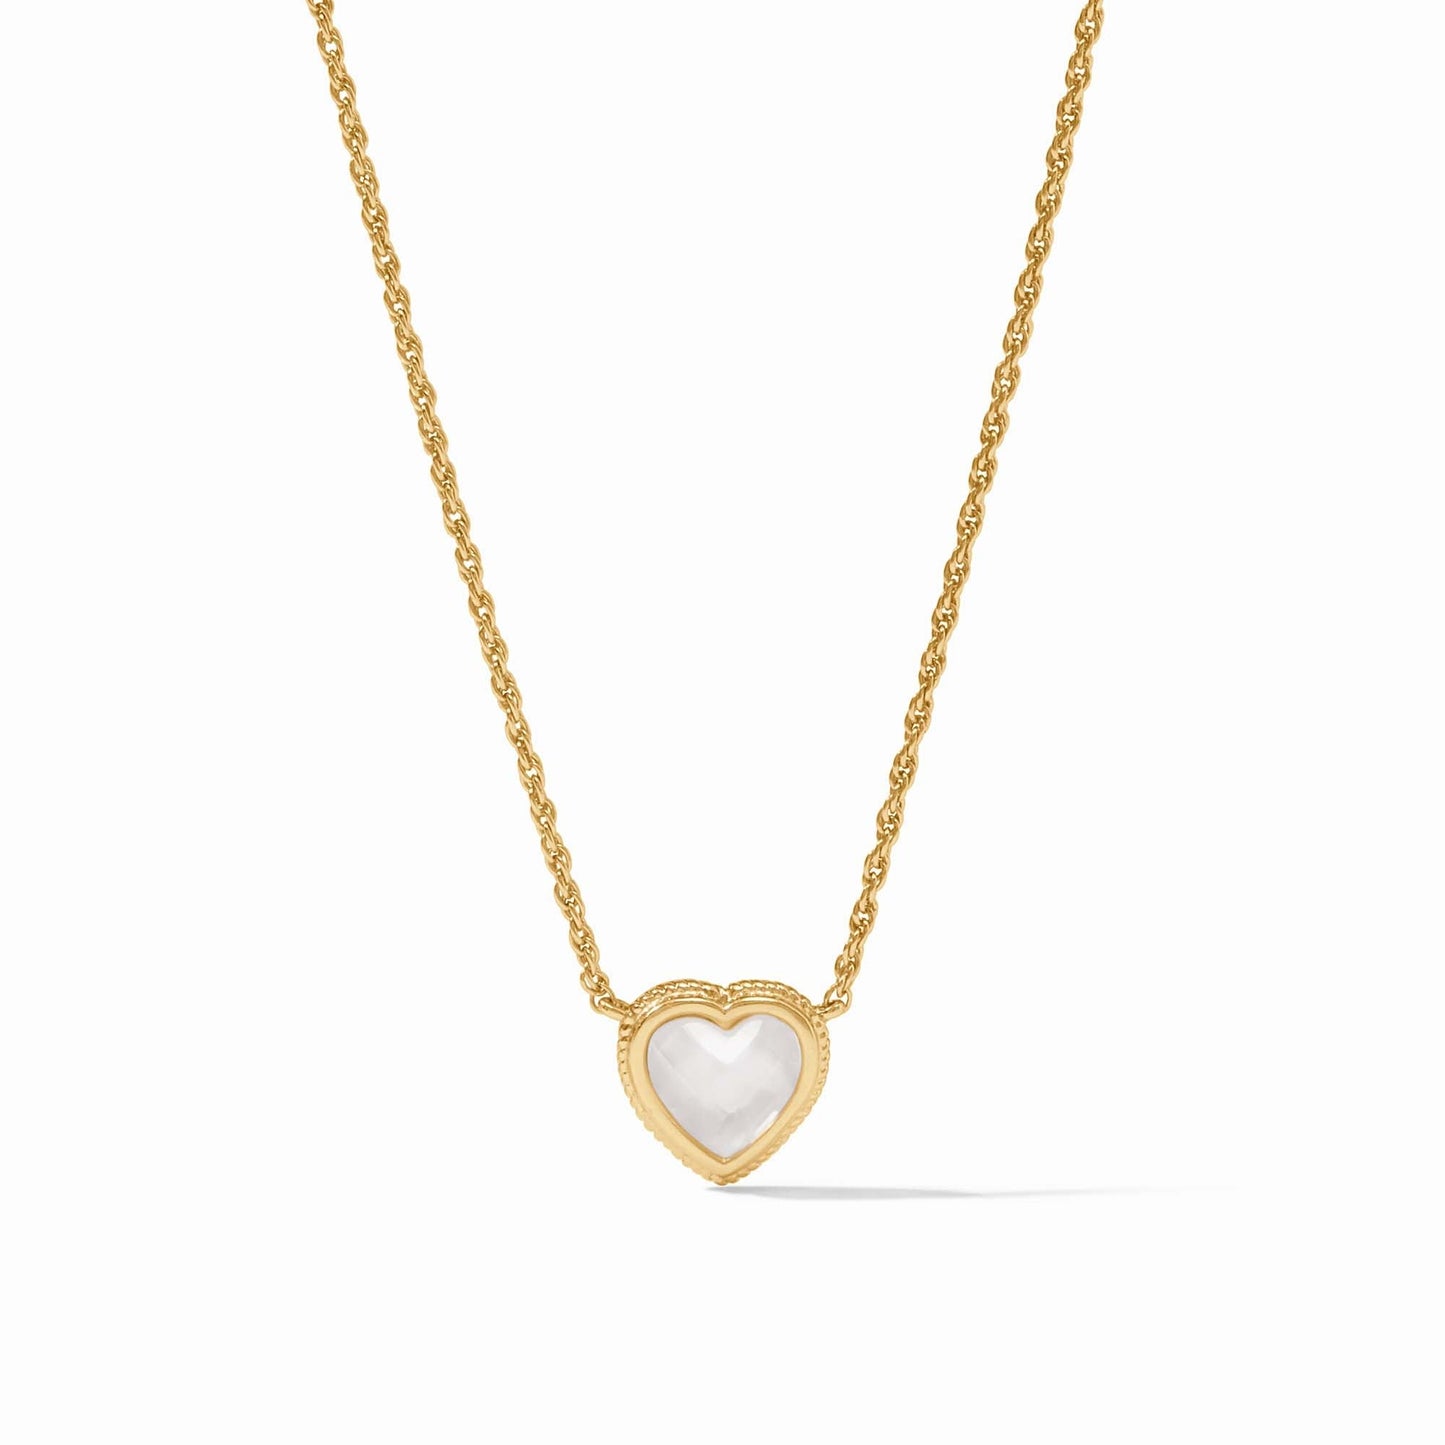 Heart Delicate Necklace - Iridescent Clear Crystal